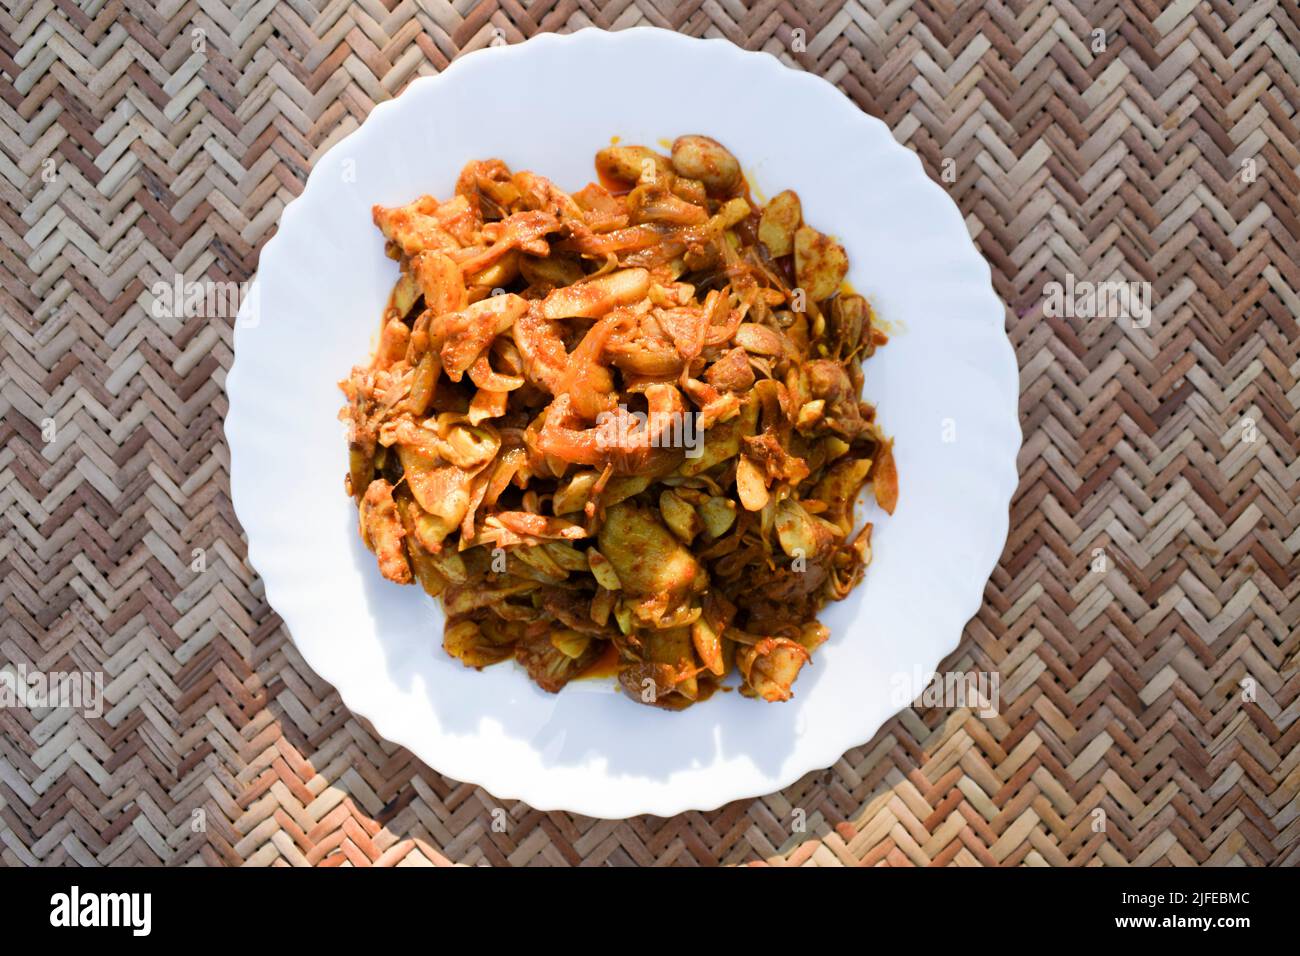 Jackfruit stir fry curry or Kathal ki sabji. Indian delicious side dish. authentic home cooked asian vegetable cooked using masalas. Stock Photo